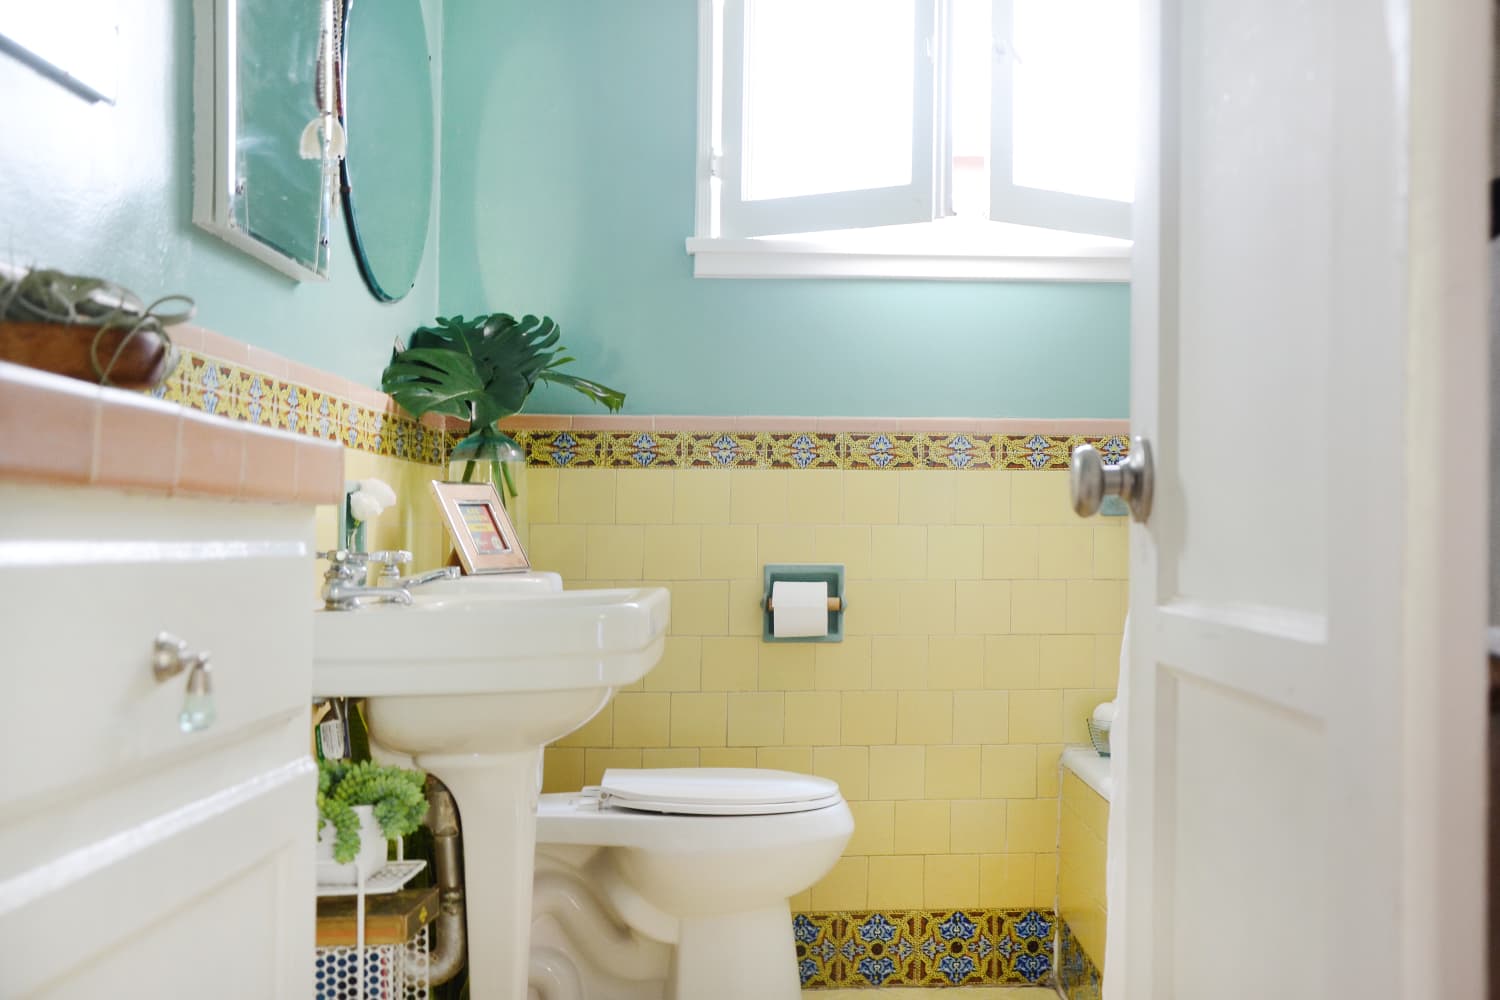 Is It Okay to Leave a Toilet Clogged Overnight?